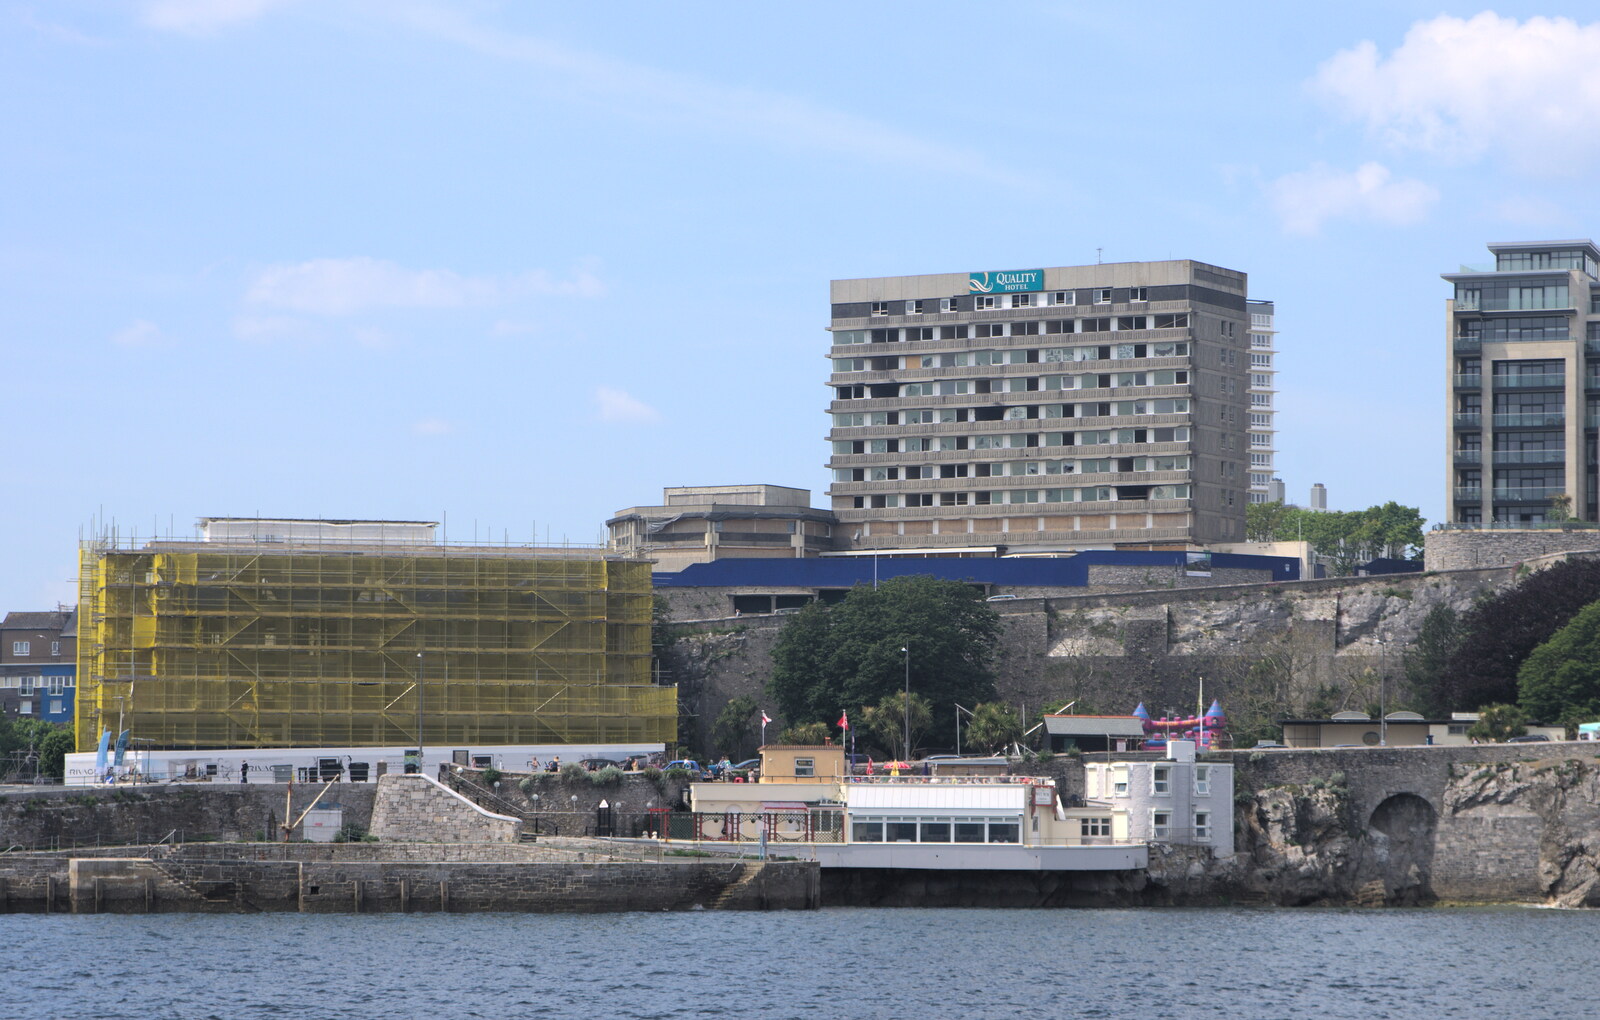 The 'Quality Hotel' looks derelict from A Tamar River Trip, Plymouth, Devon - 30th May 2016